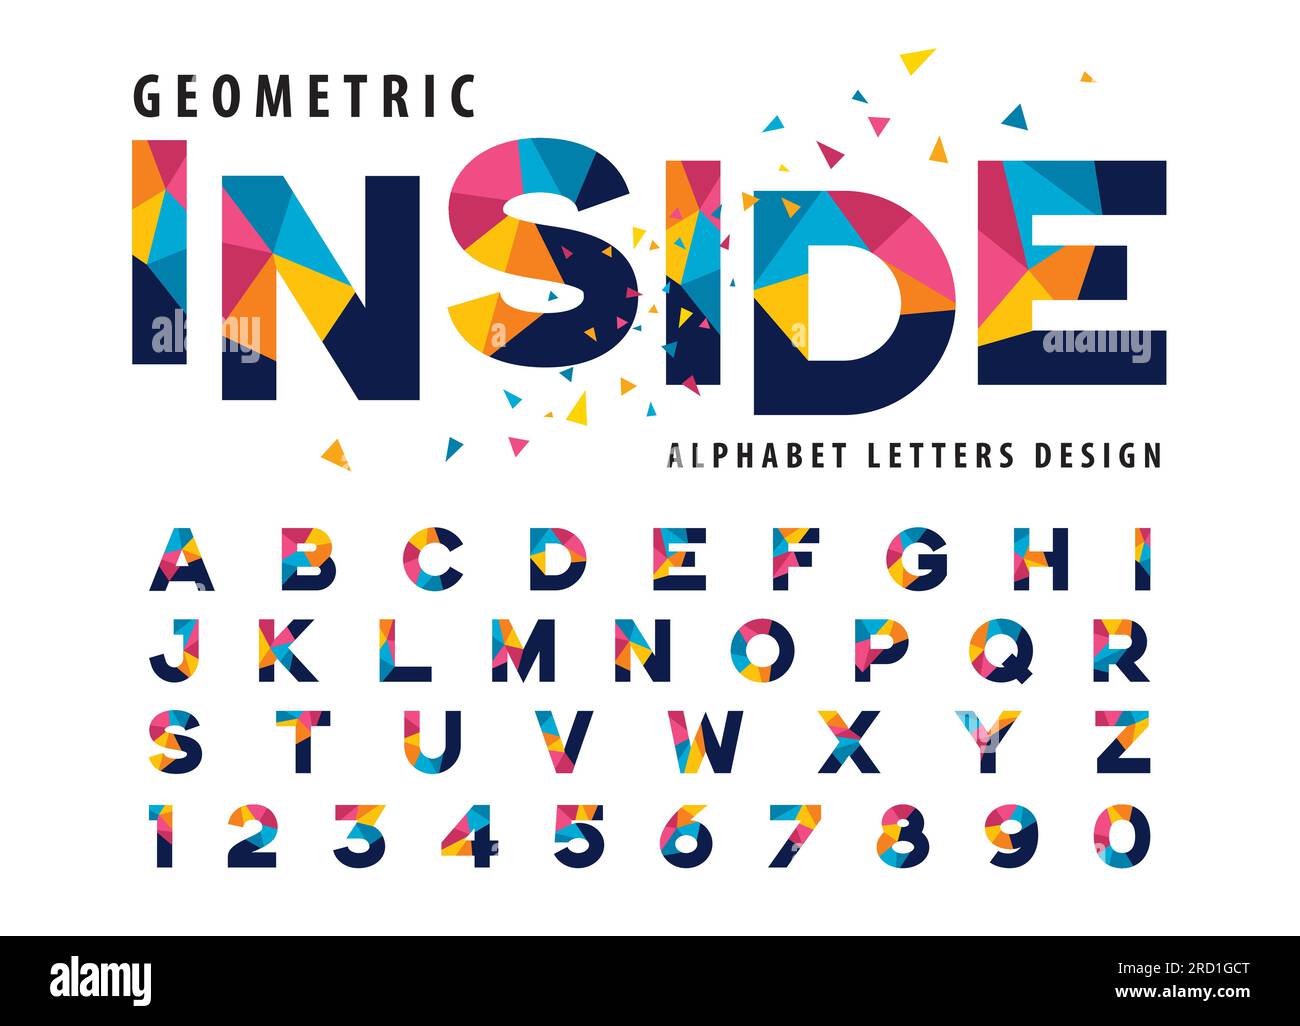 Geometric shape bold poster letters font Vector Image